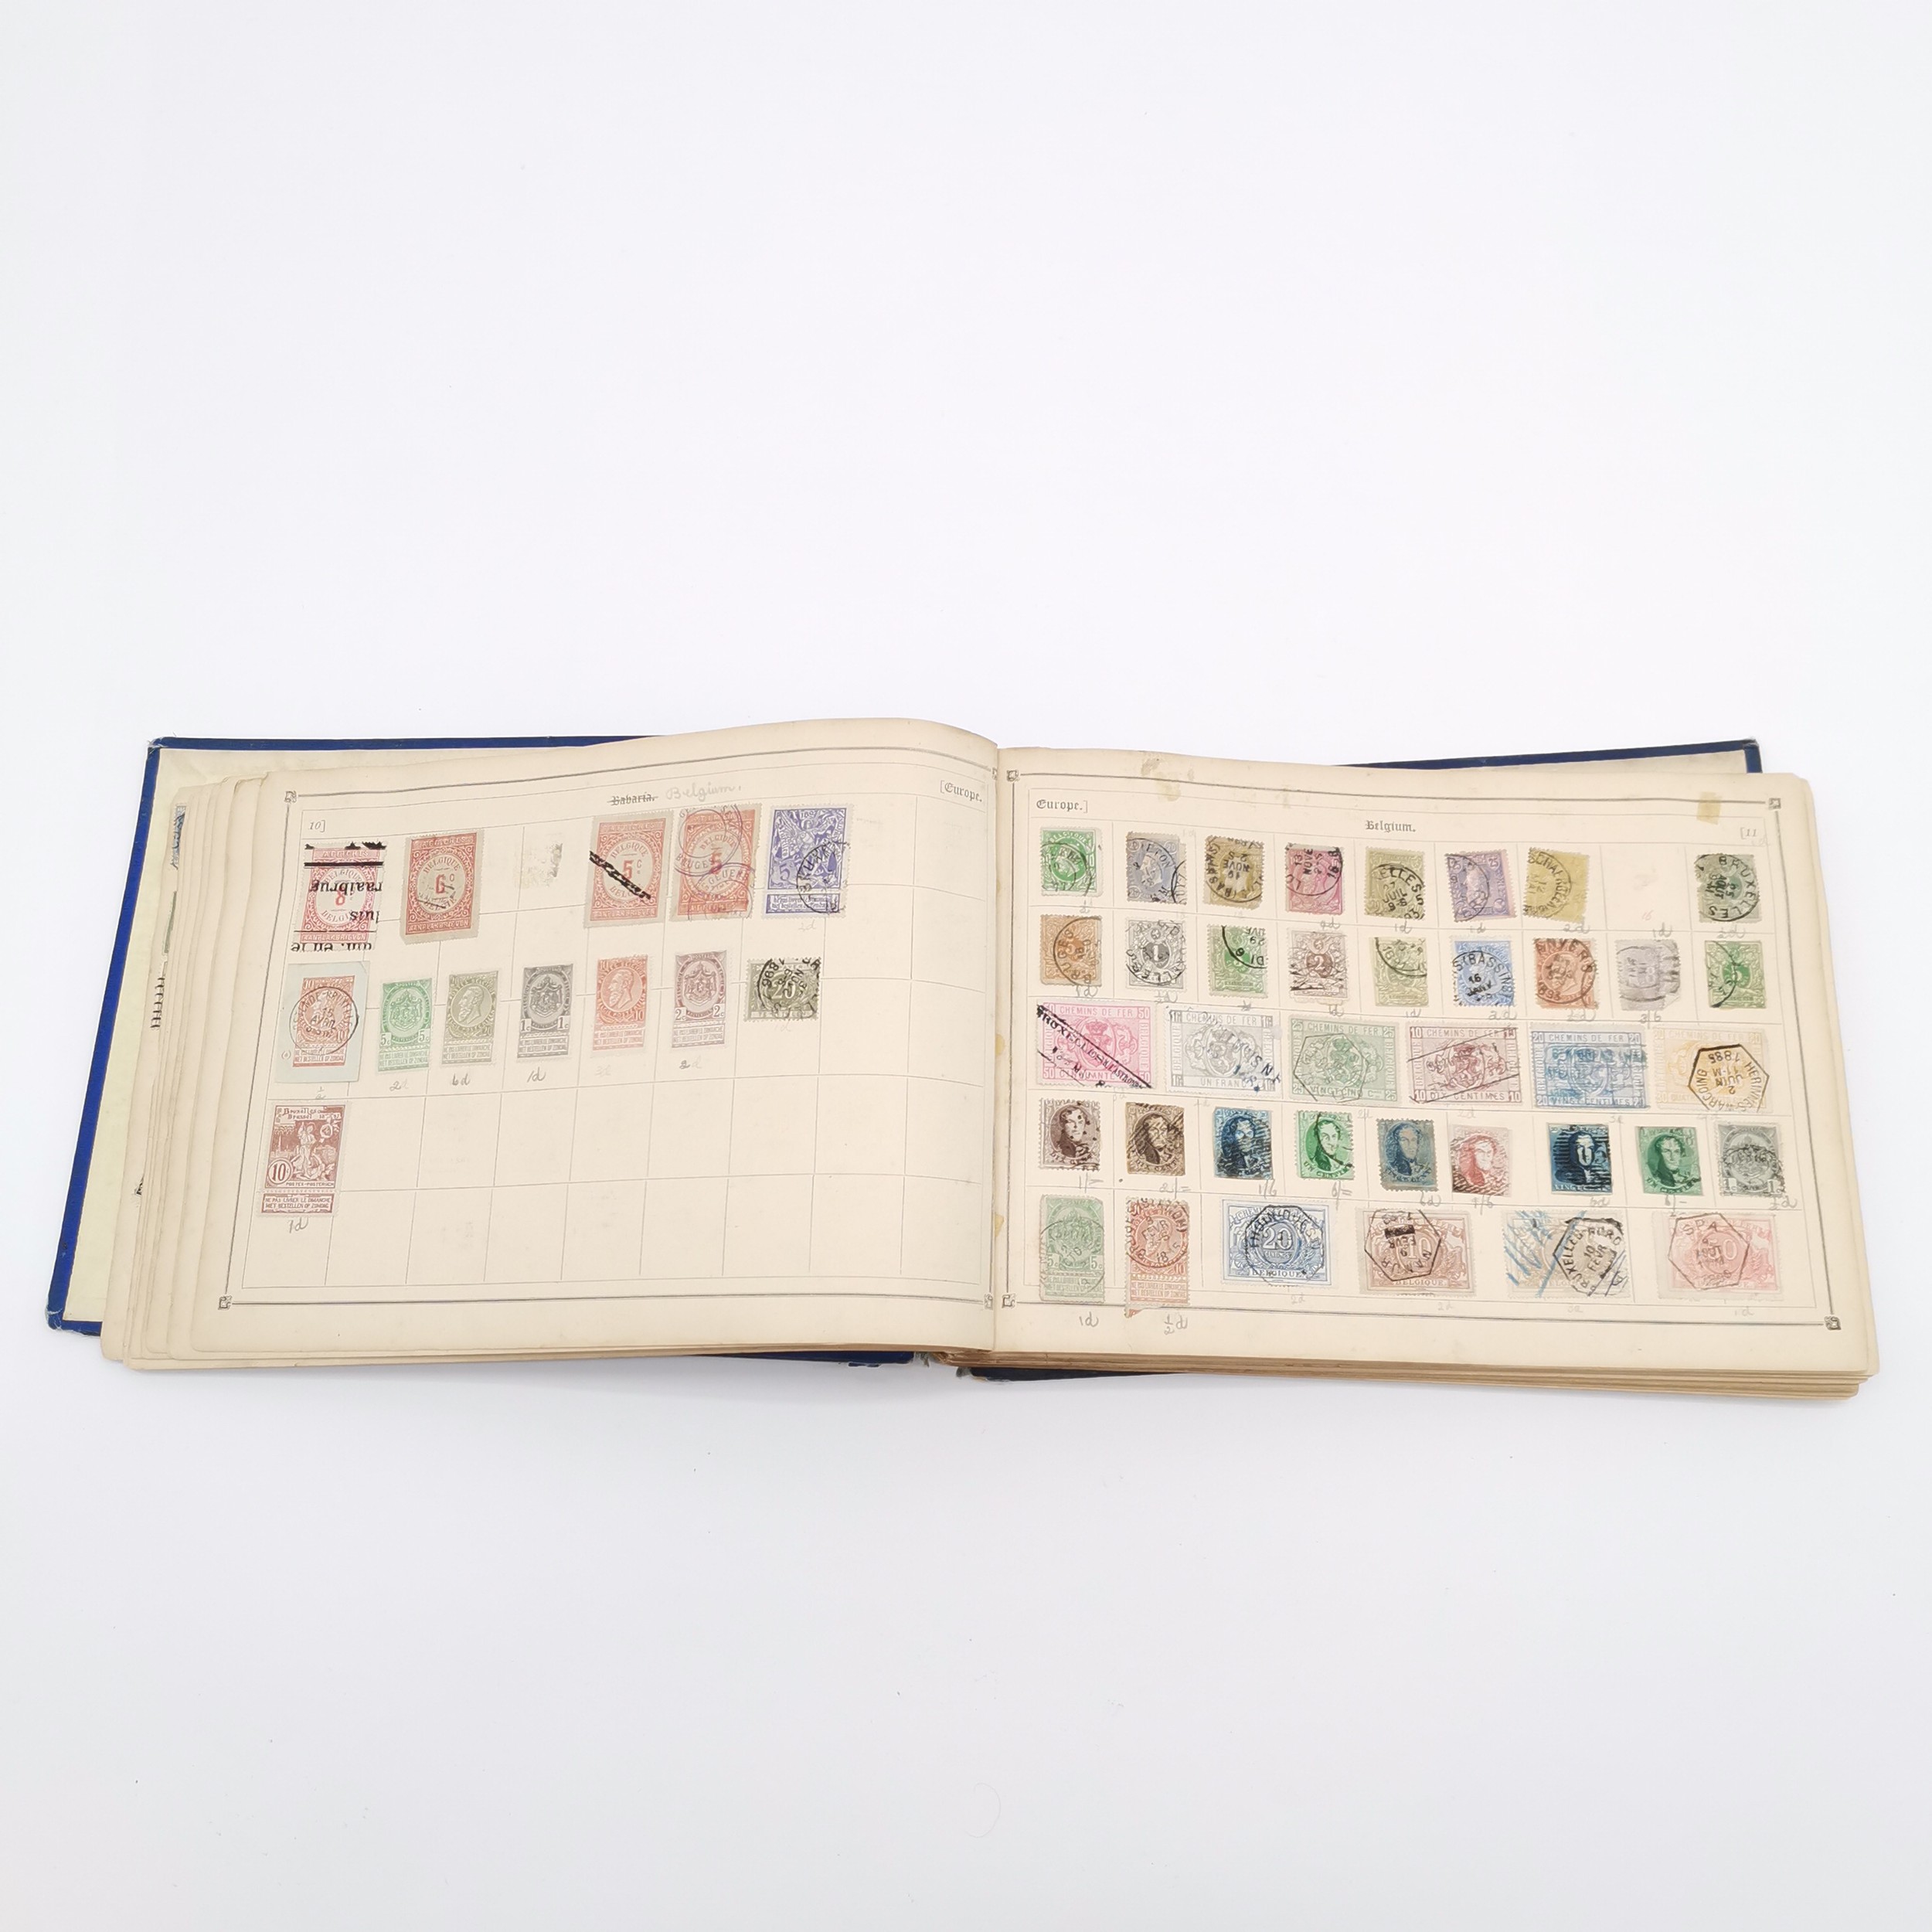 Cosmopolitan postage stamp album with useful collection inc GB 1d penny black, China dragon stamps & - Image 19 of 26